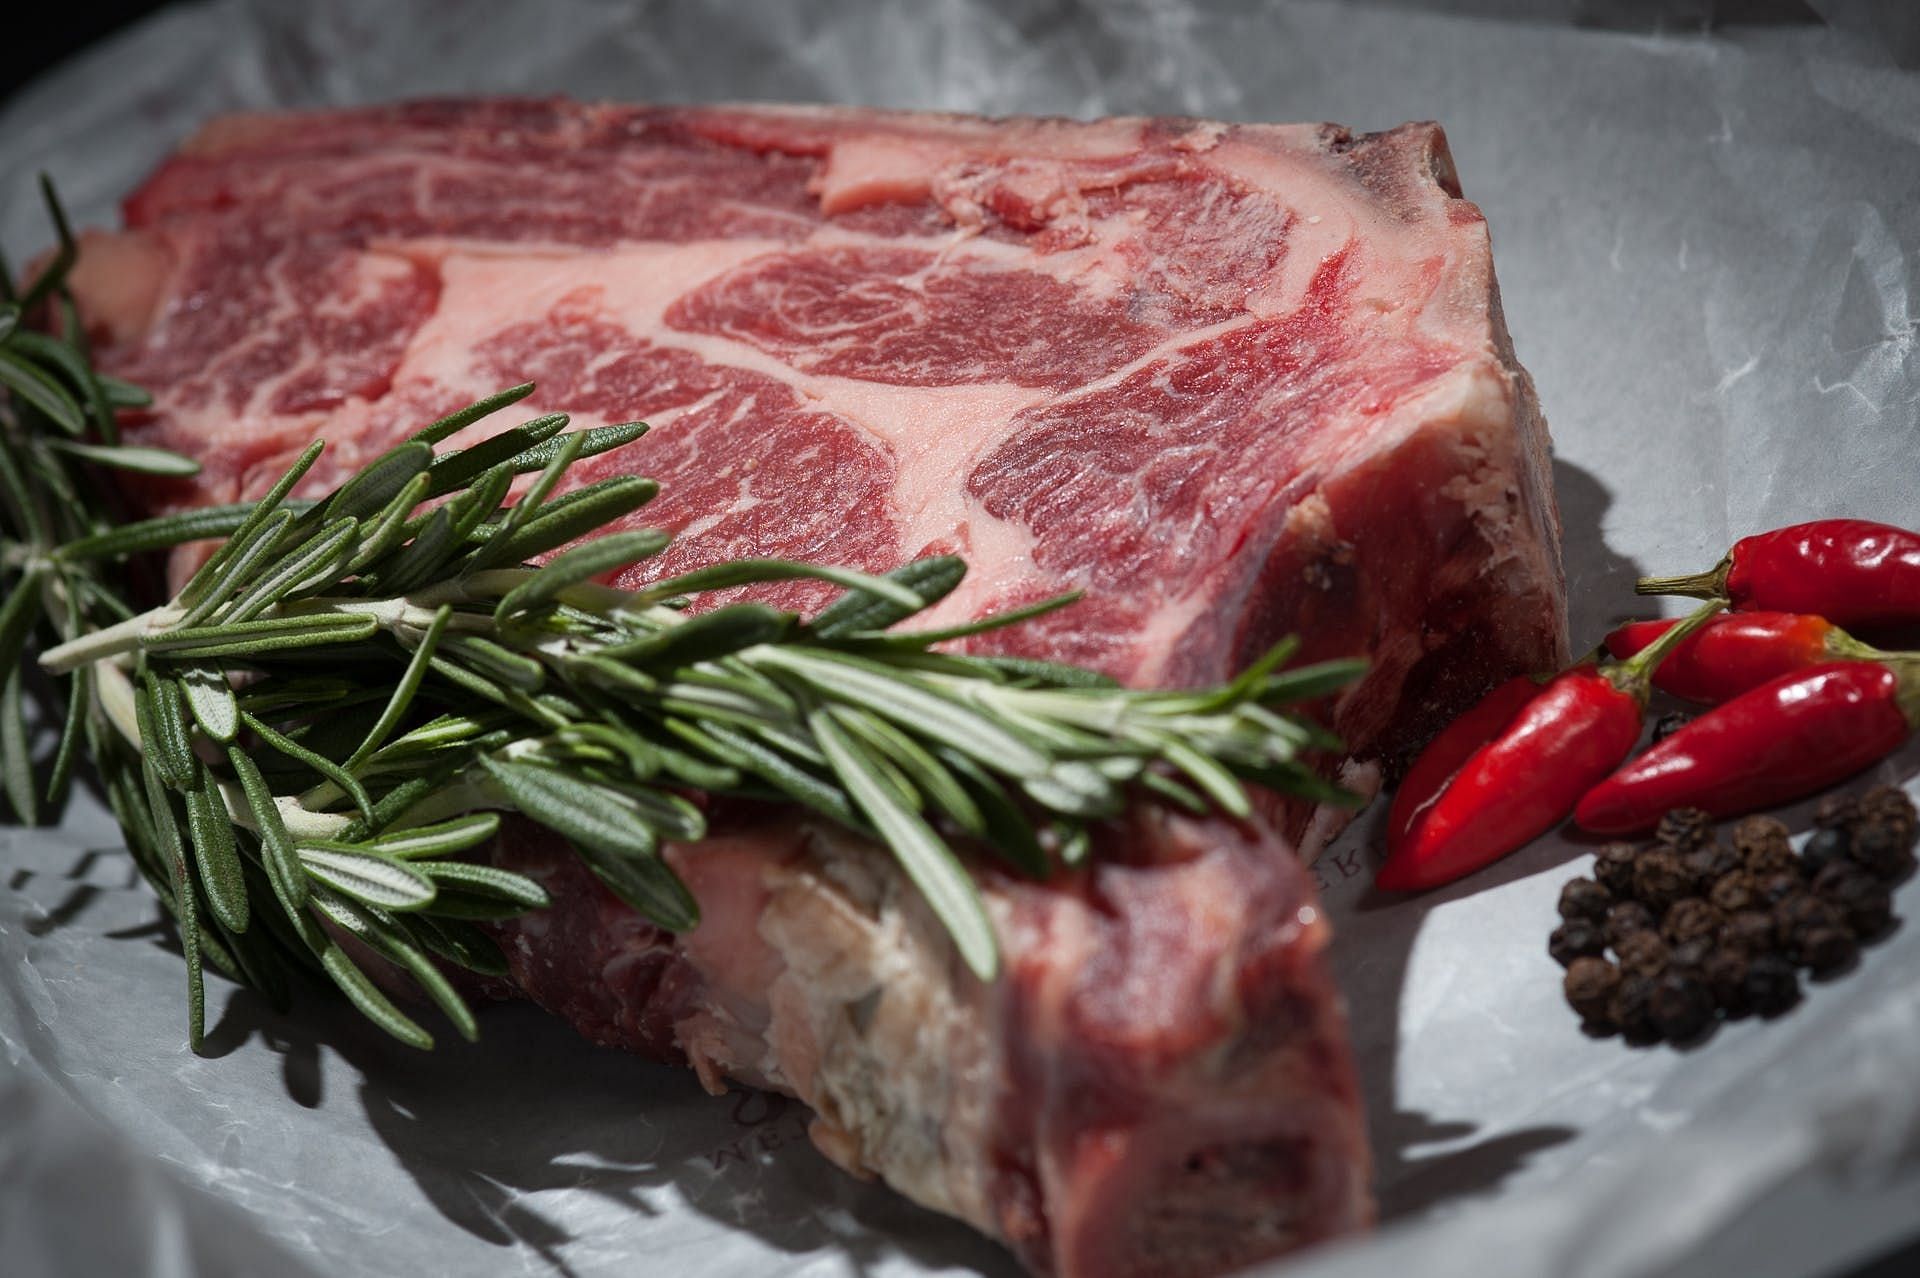 Red meat as one of the worst foods for inflammation (image sourced via Pexels / Photo by Mali maedera)